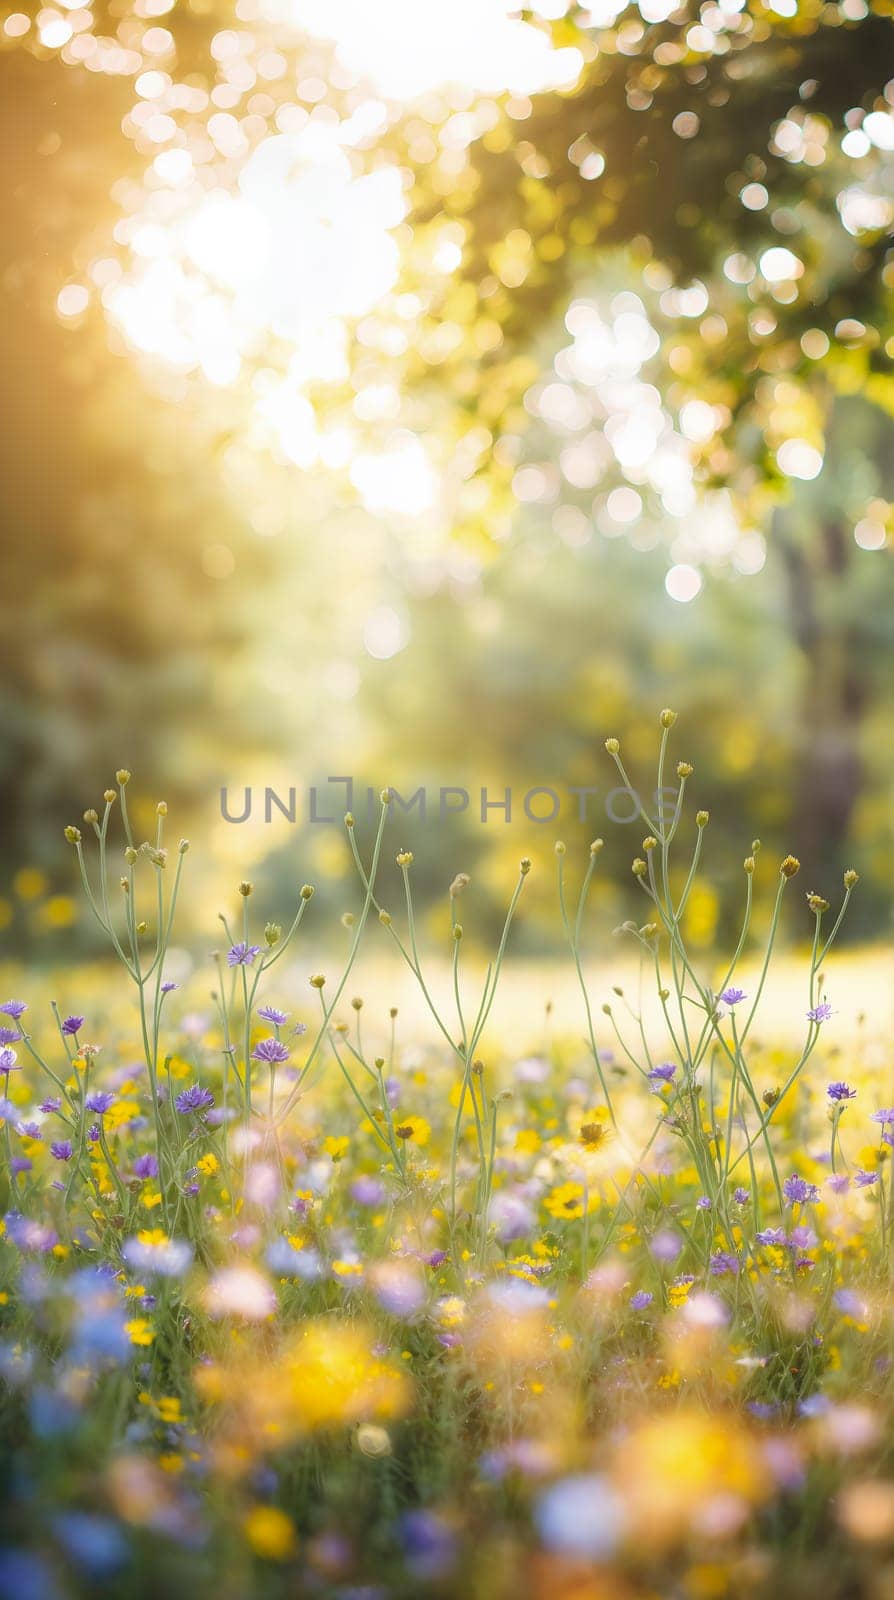 A vibrant field of wildflowers bathed in sunlight with trees casting shadows.